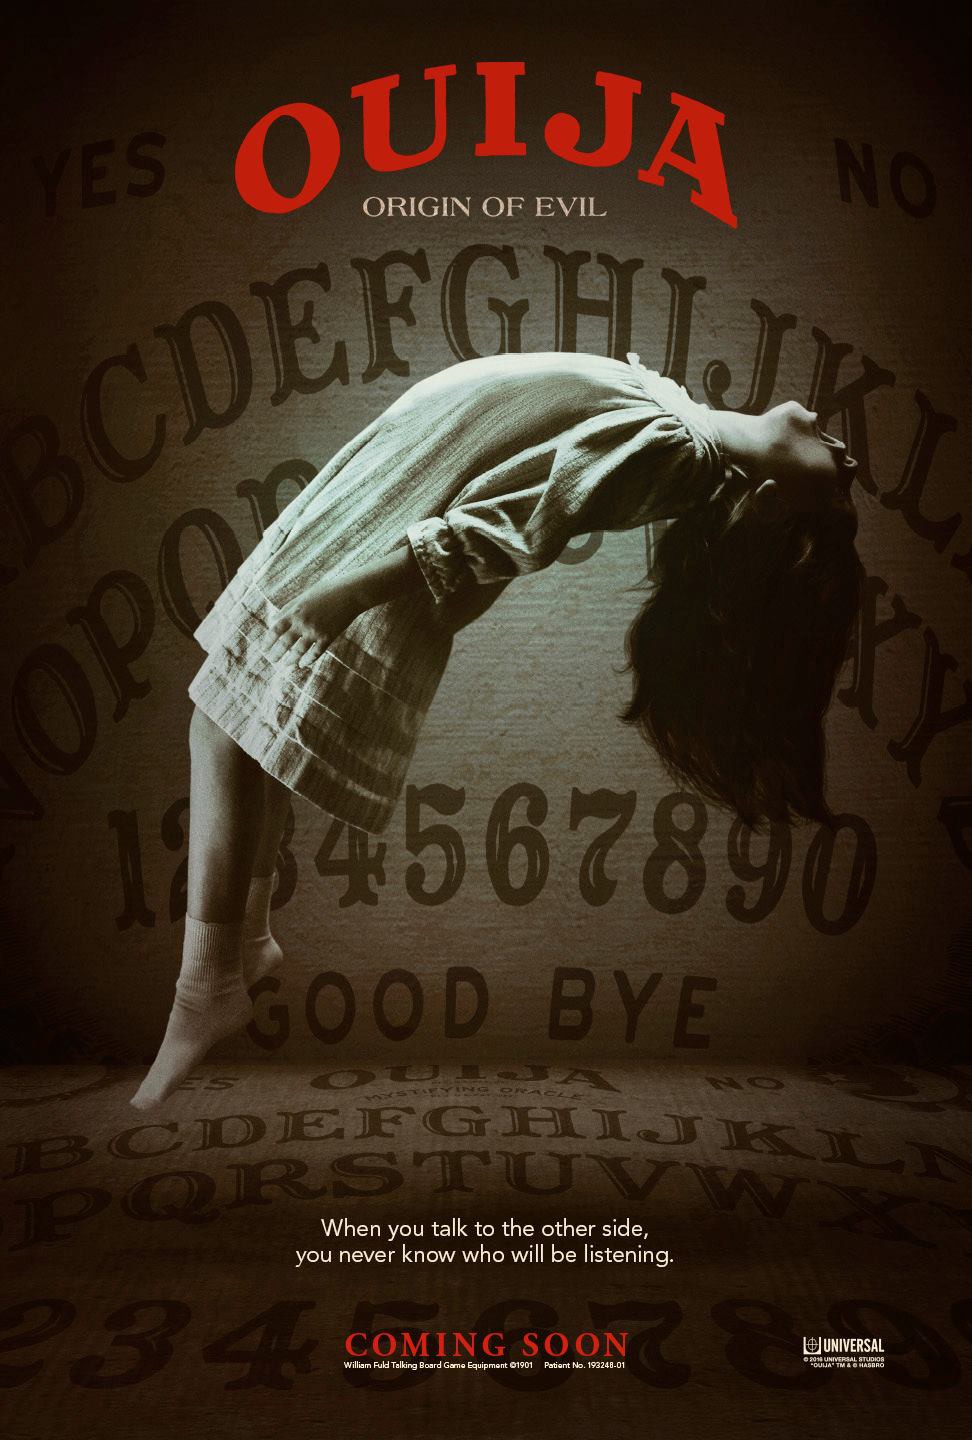 OUIJA: ORIGIN OF EVIL Clips, Images and Posters | The Entertainment Factor